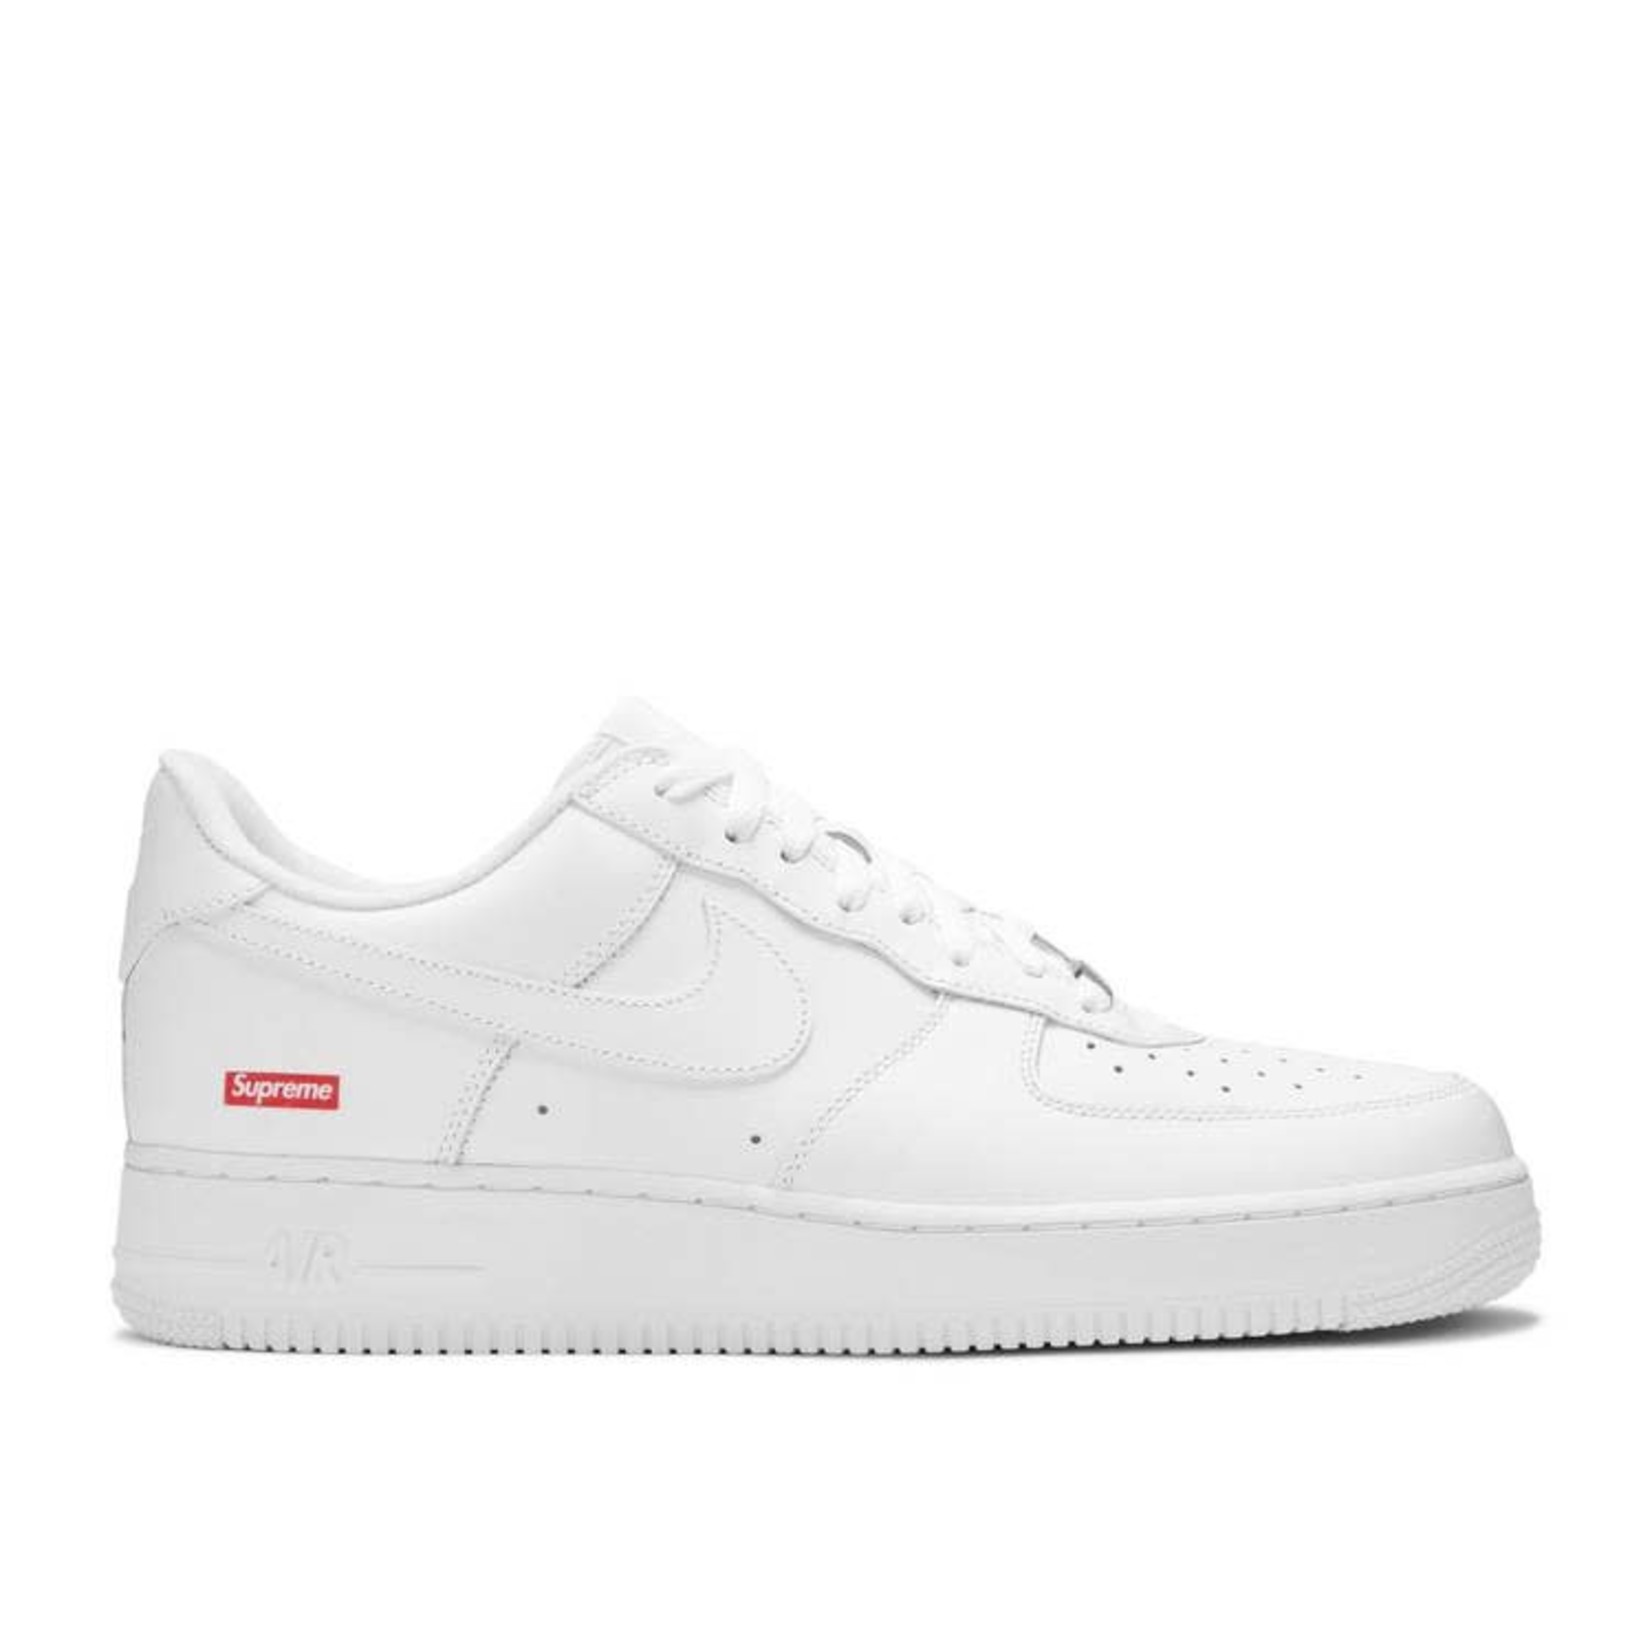 Nike Nike Air Force 1 Low Supreme White Size 10.5, DS BRAND NEW